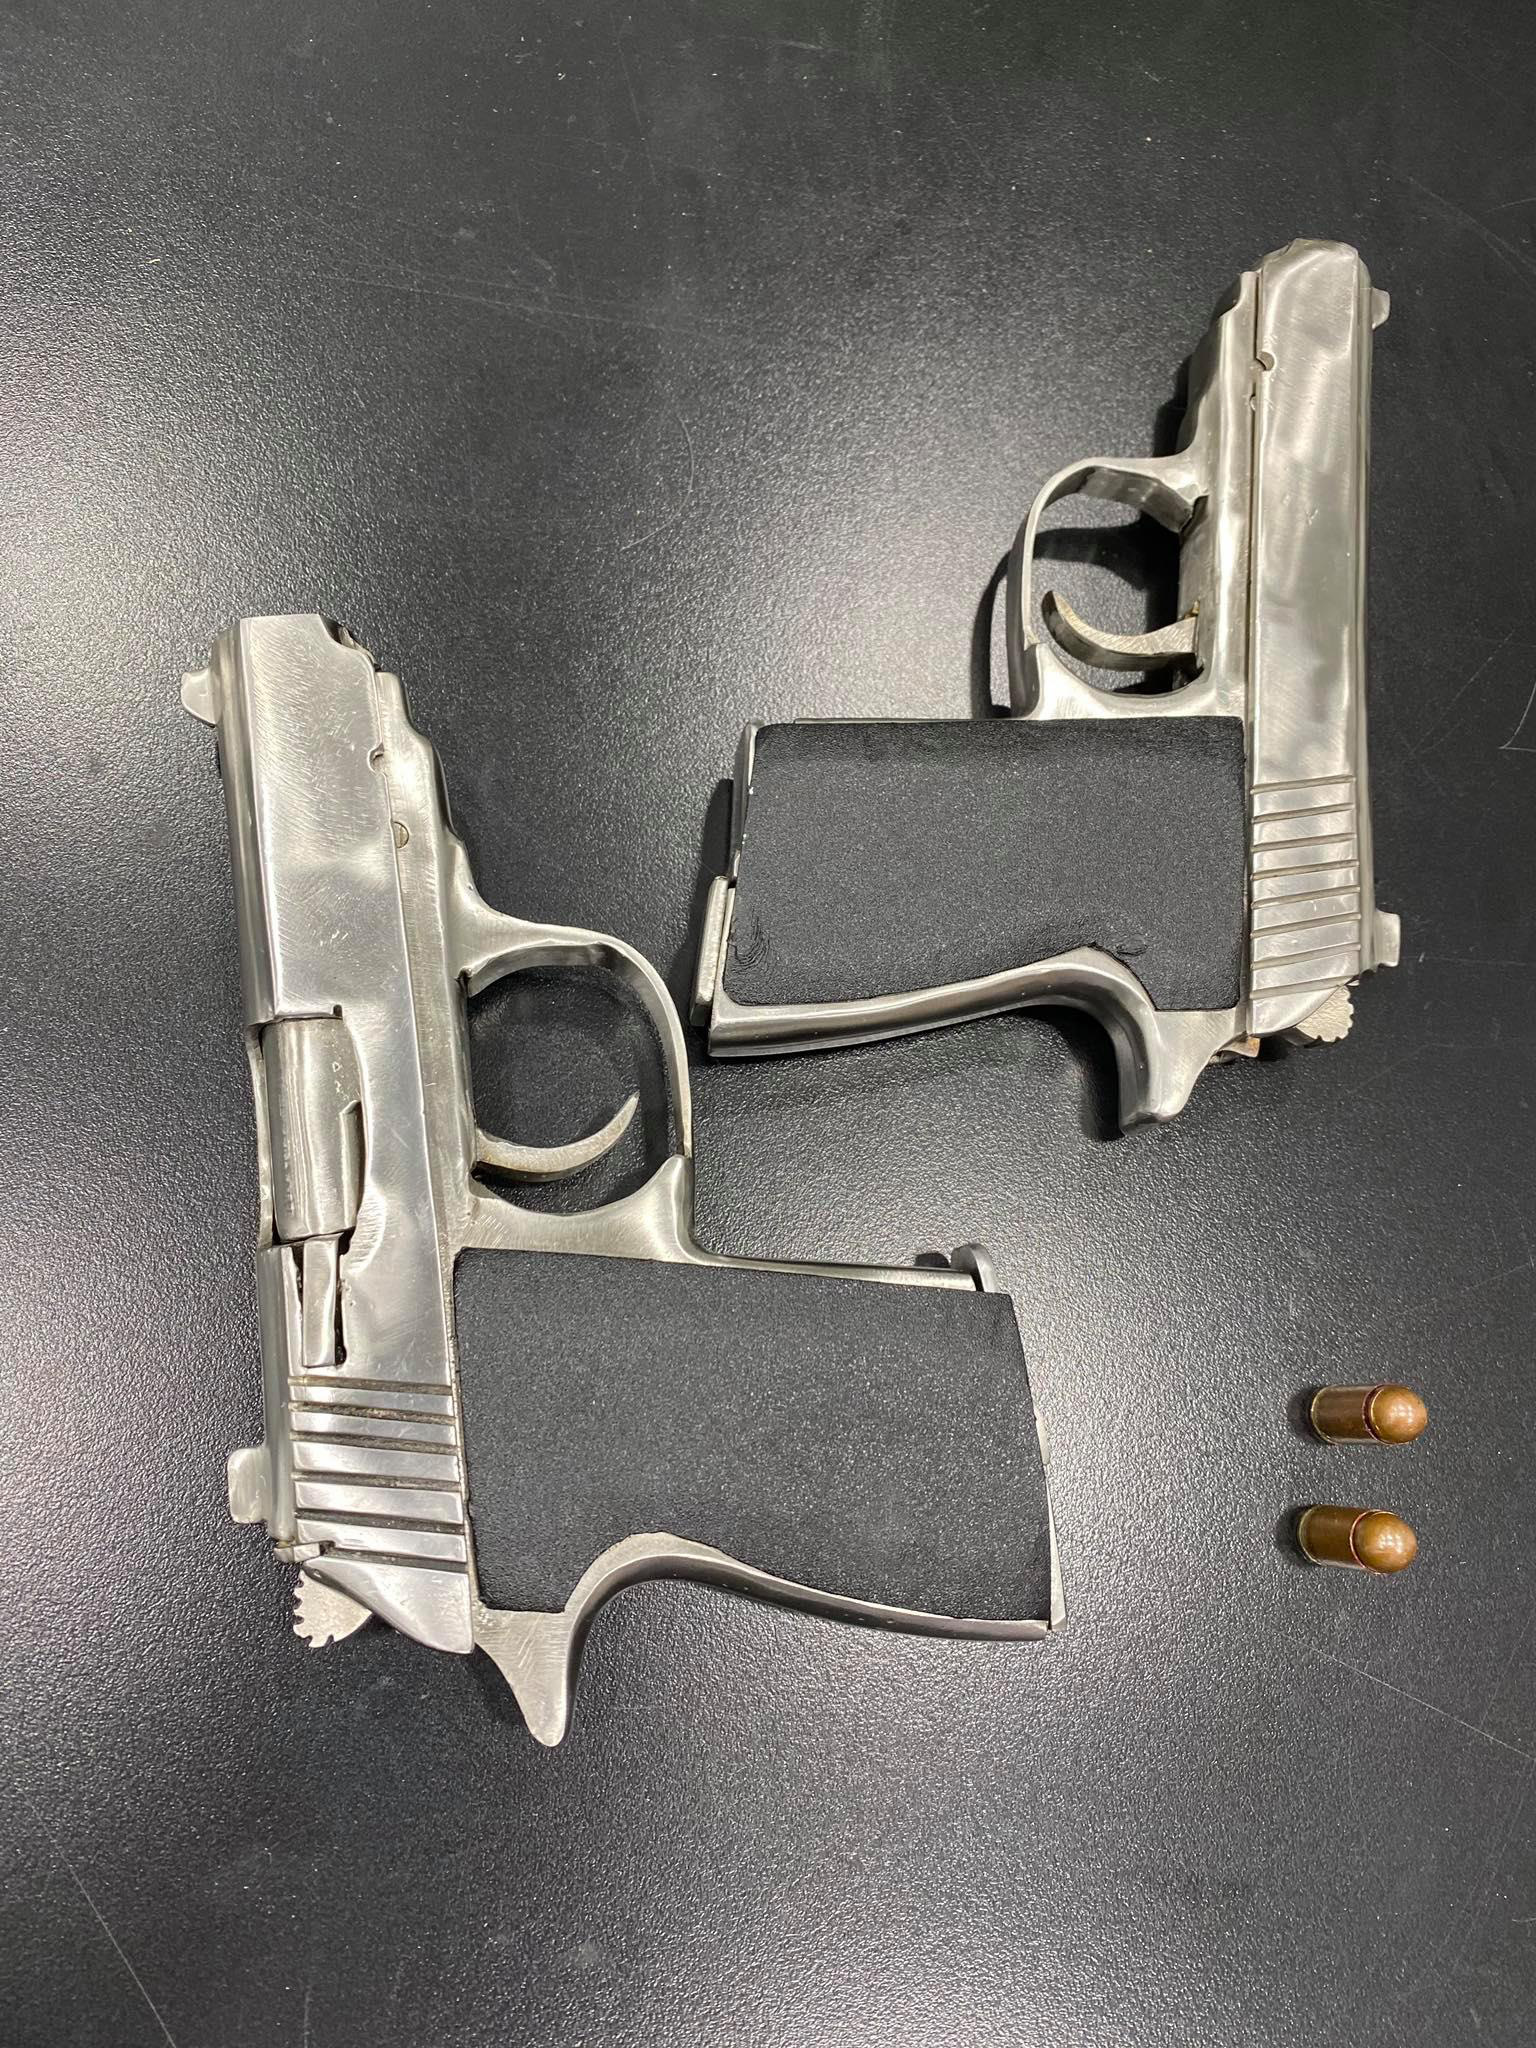 Two pistols confiscated from an illegal firearms-manufacturing facility in Hai Phong City, Vietnam are seen in a supplied photo.